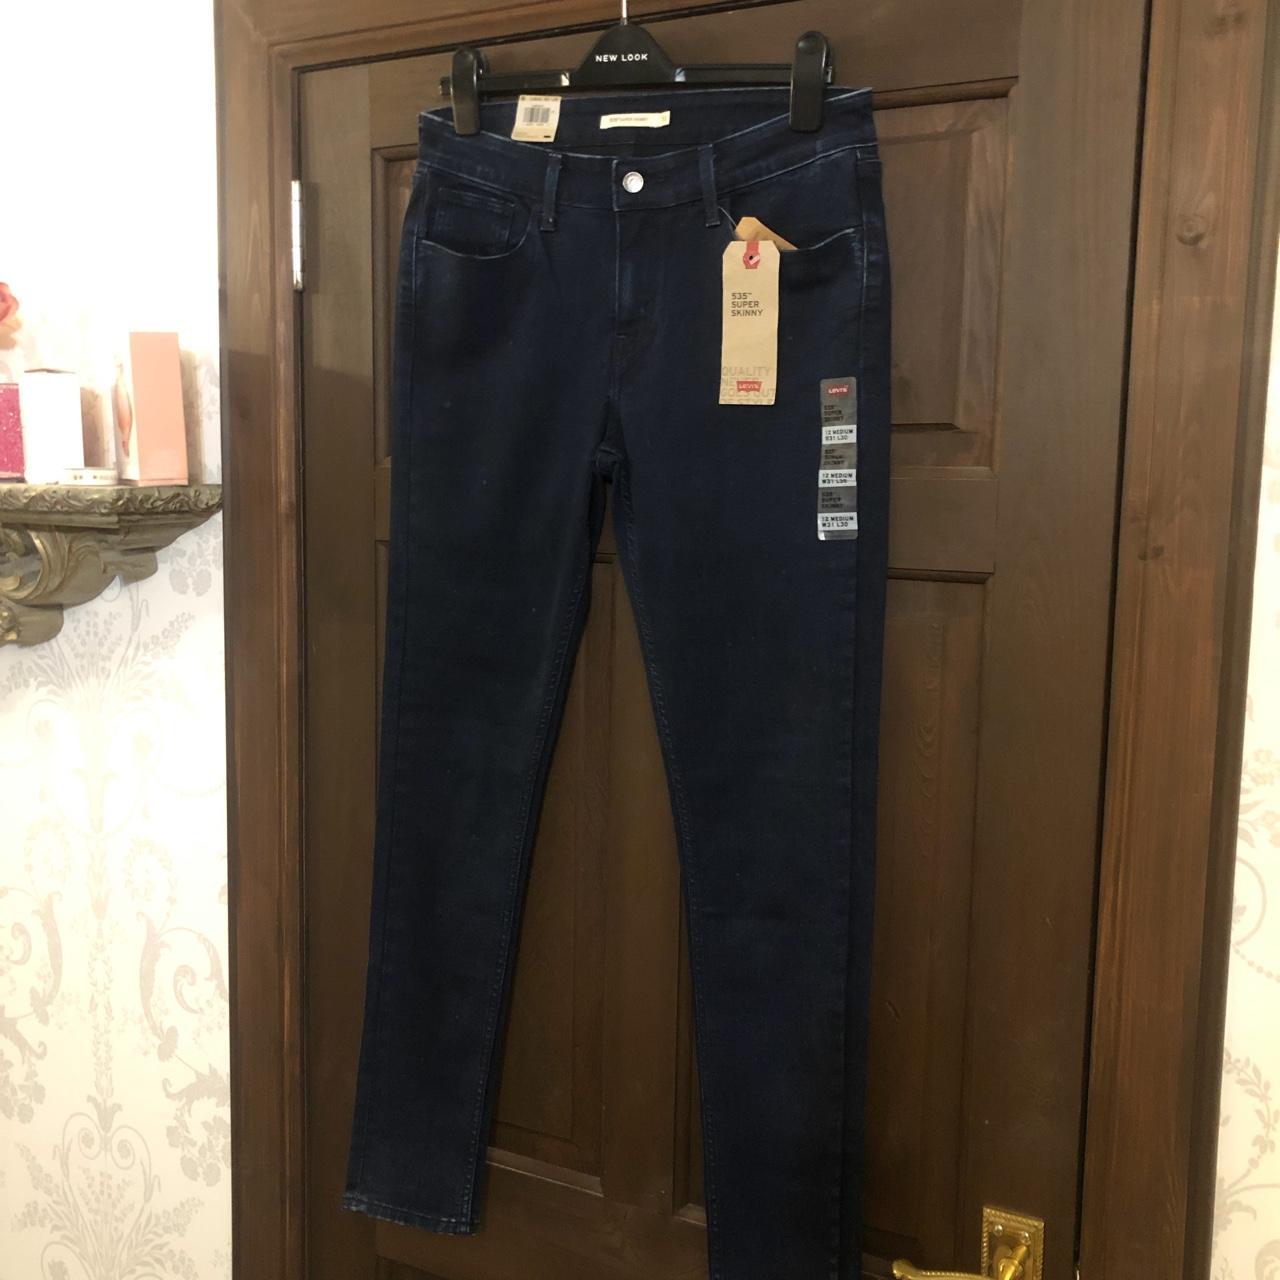 Levis Super Skinny Jeans Brand New With Tags Size Depop 